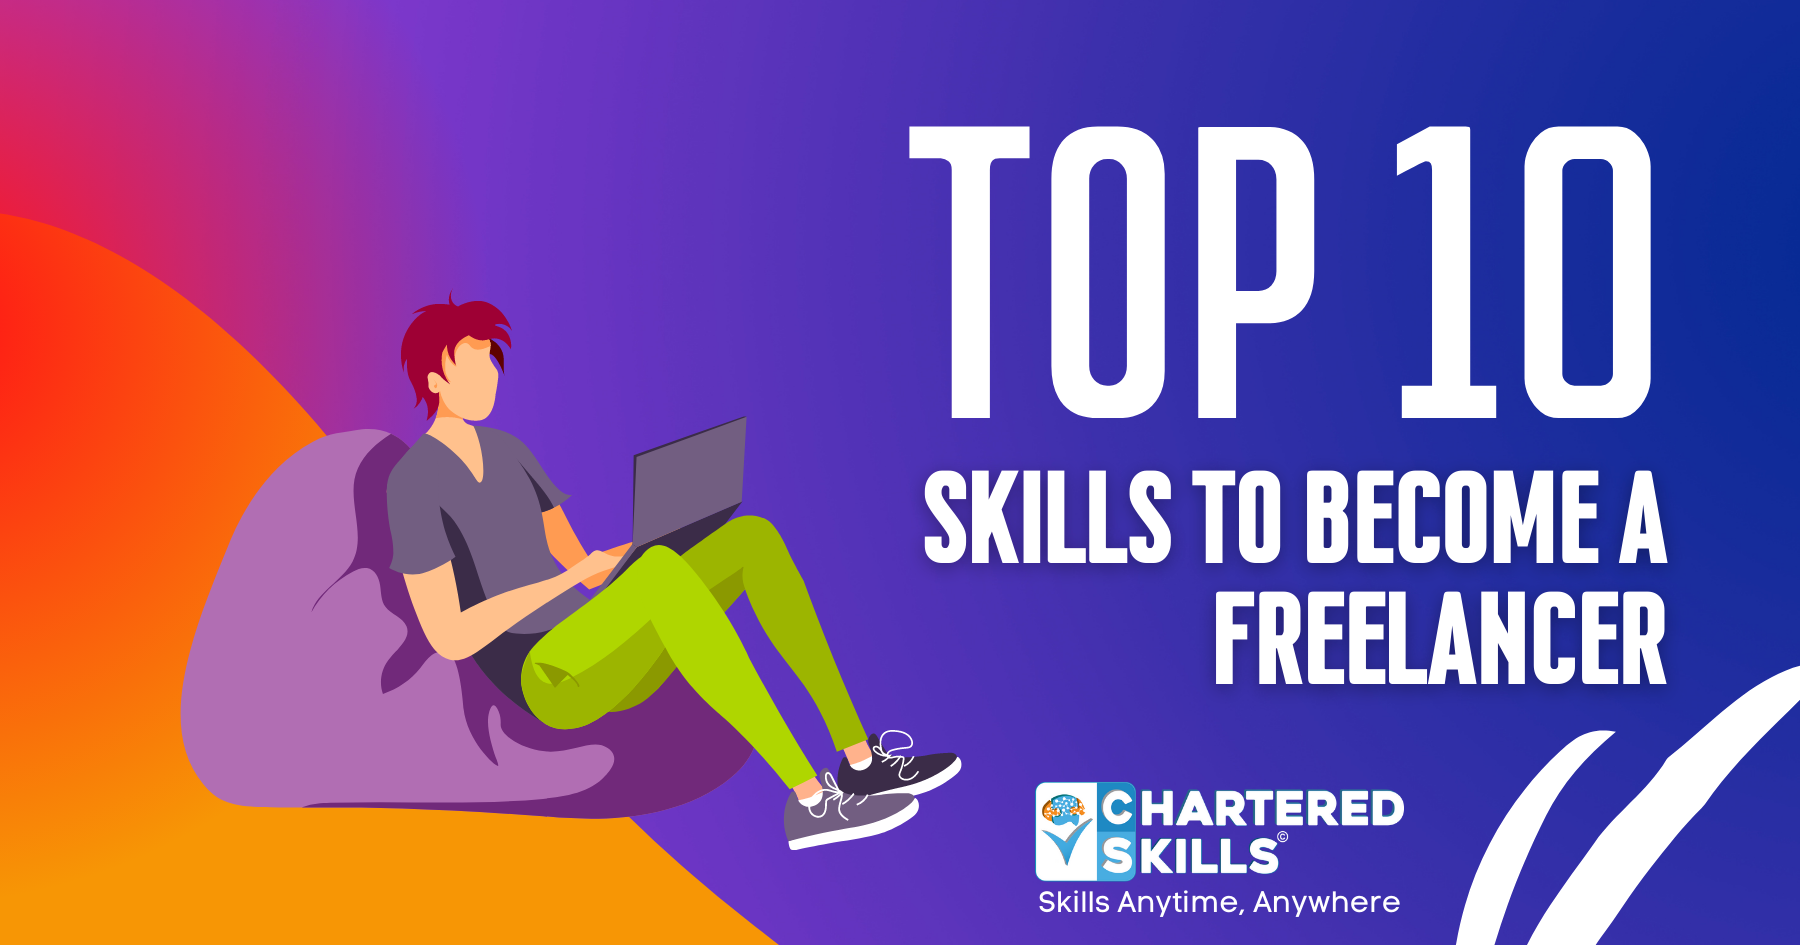 Top 10 skills to become a freelancer